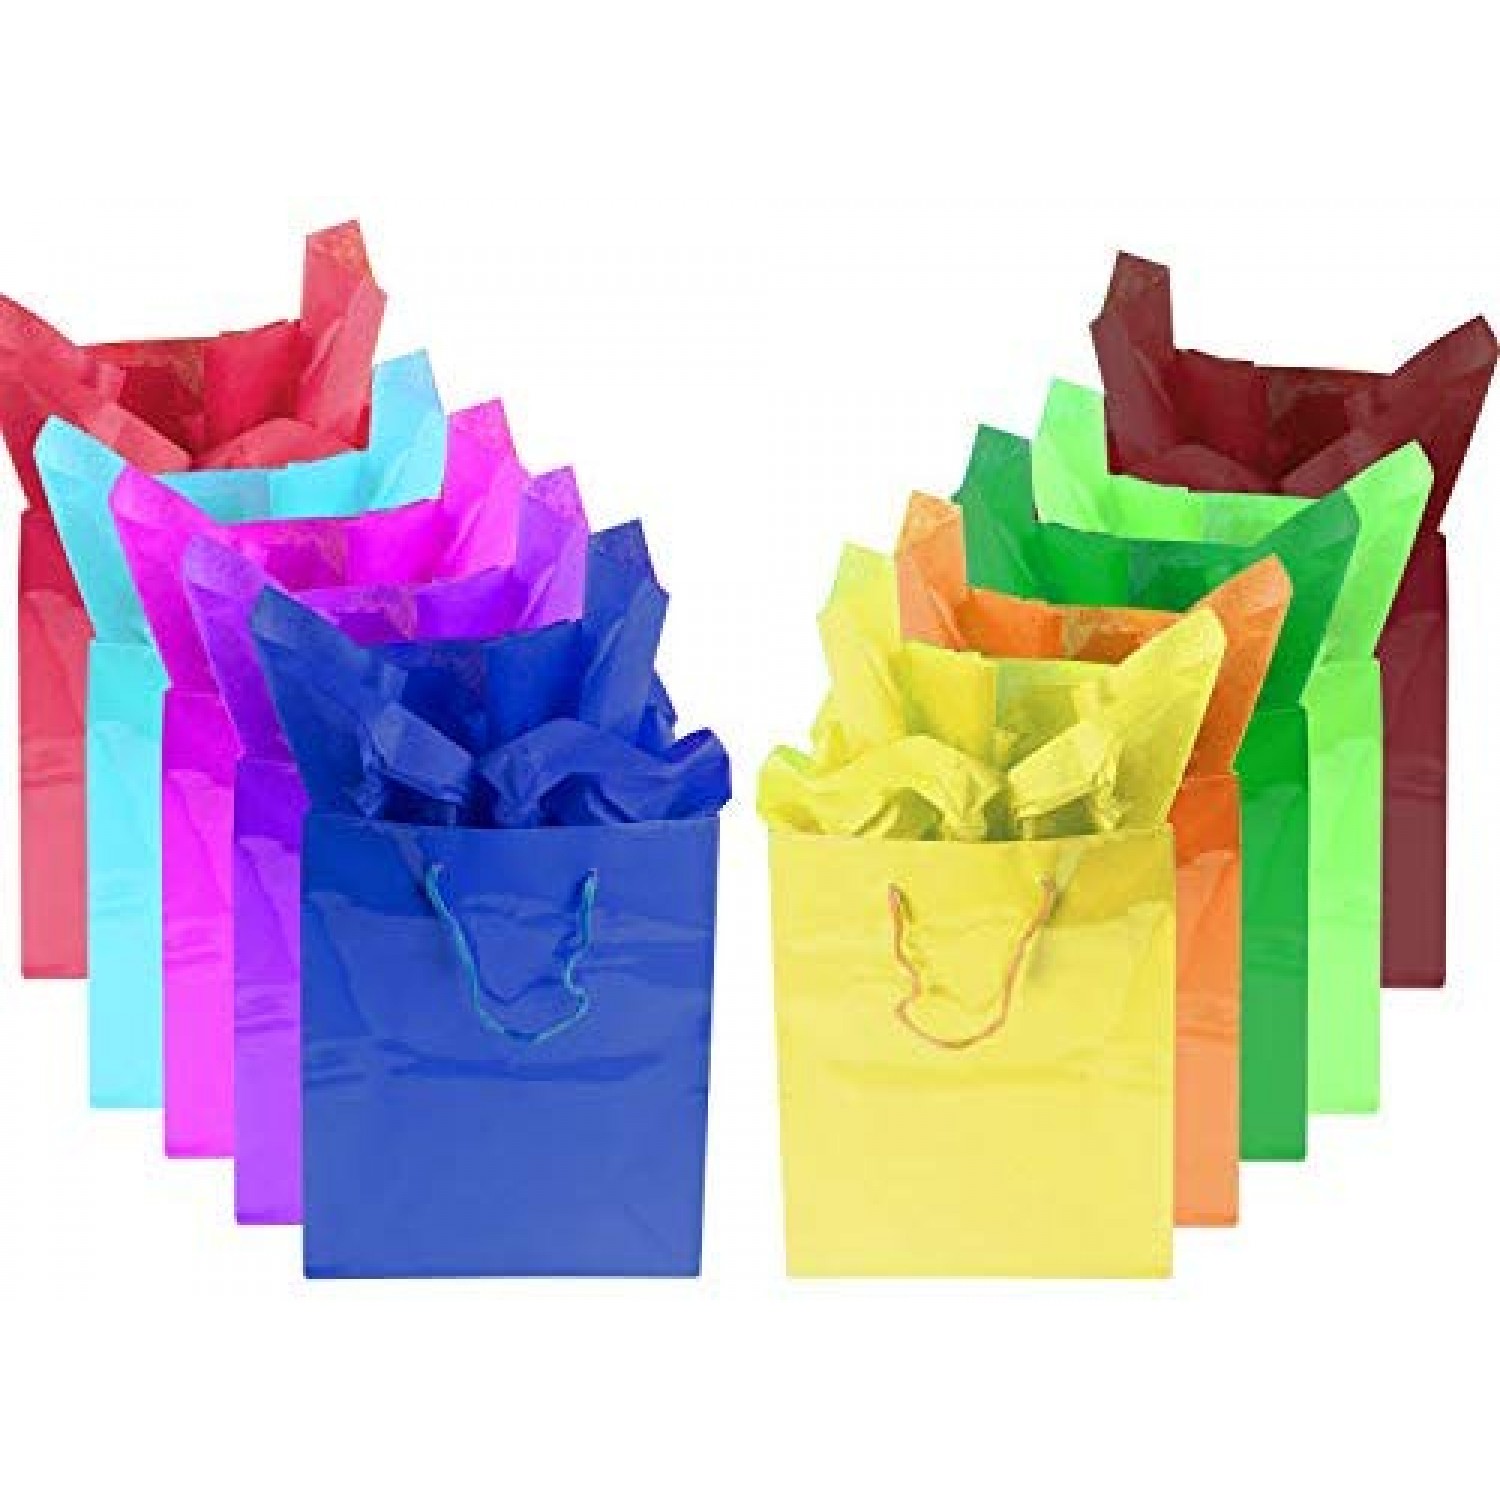 24 Colors Gift Colored Tissue Paper Bulk, Assorted Rainbow Mix, for Gift  Bags Box Gift Wrapping Crafts Project, Wedding Birthday Party Favors -  China Colored Tissue Paper, Gift Wrapping Paper